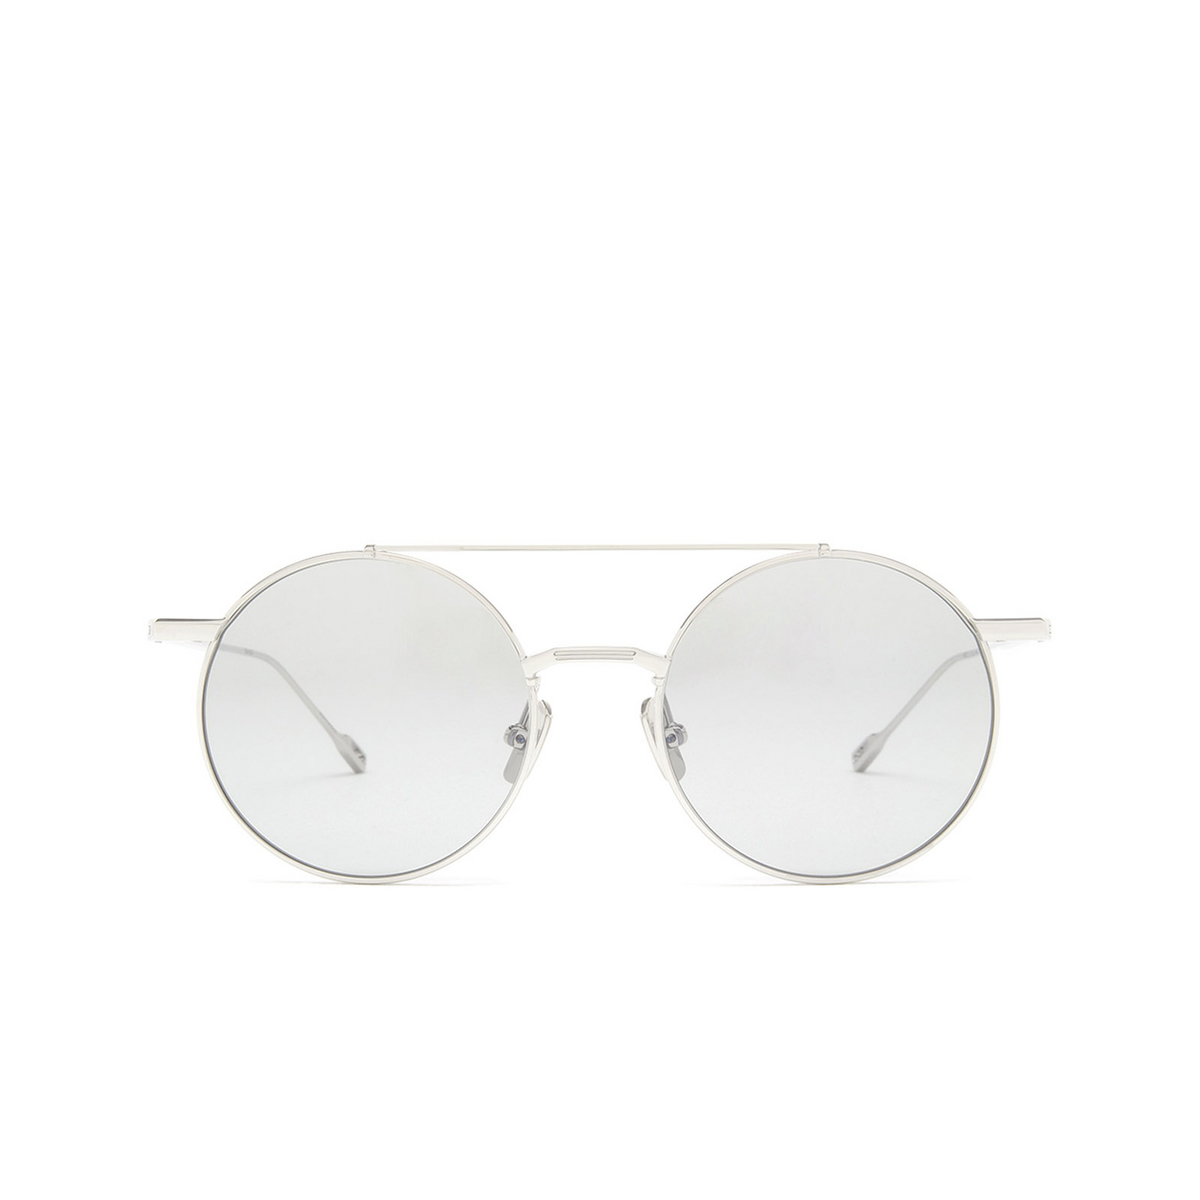 Native Sons® Round Sunglasses: Aston Exp color Silver - front view